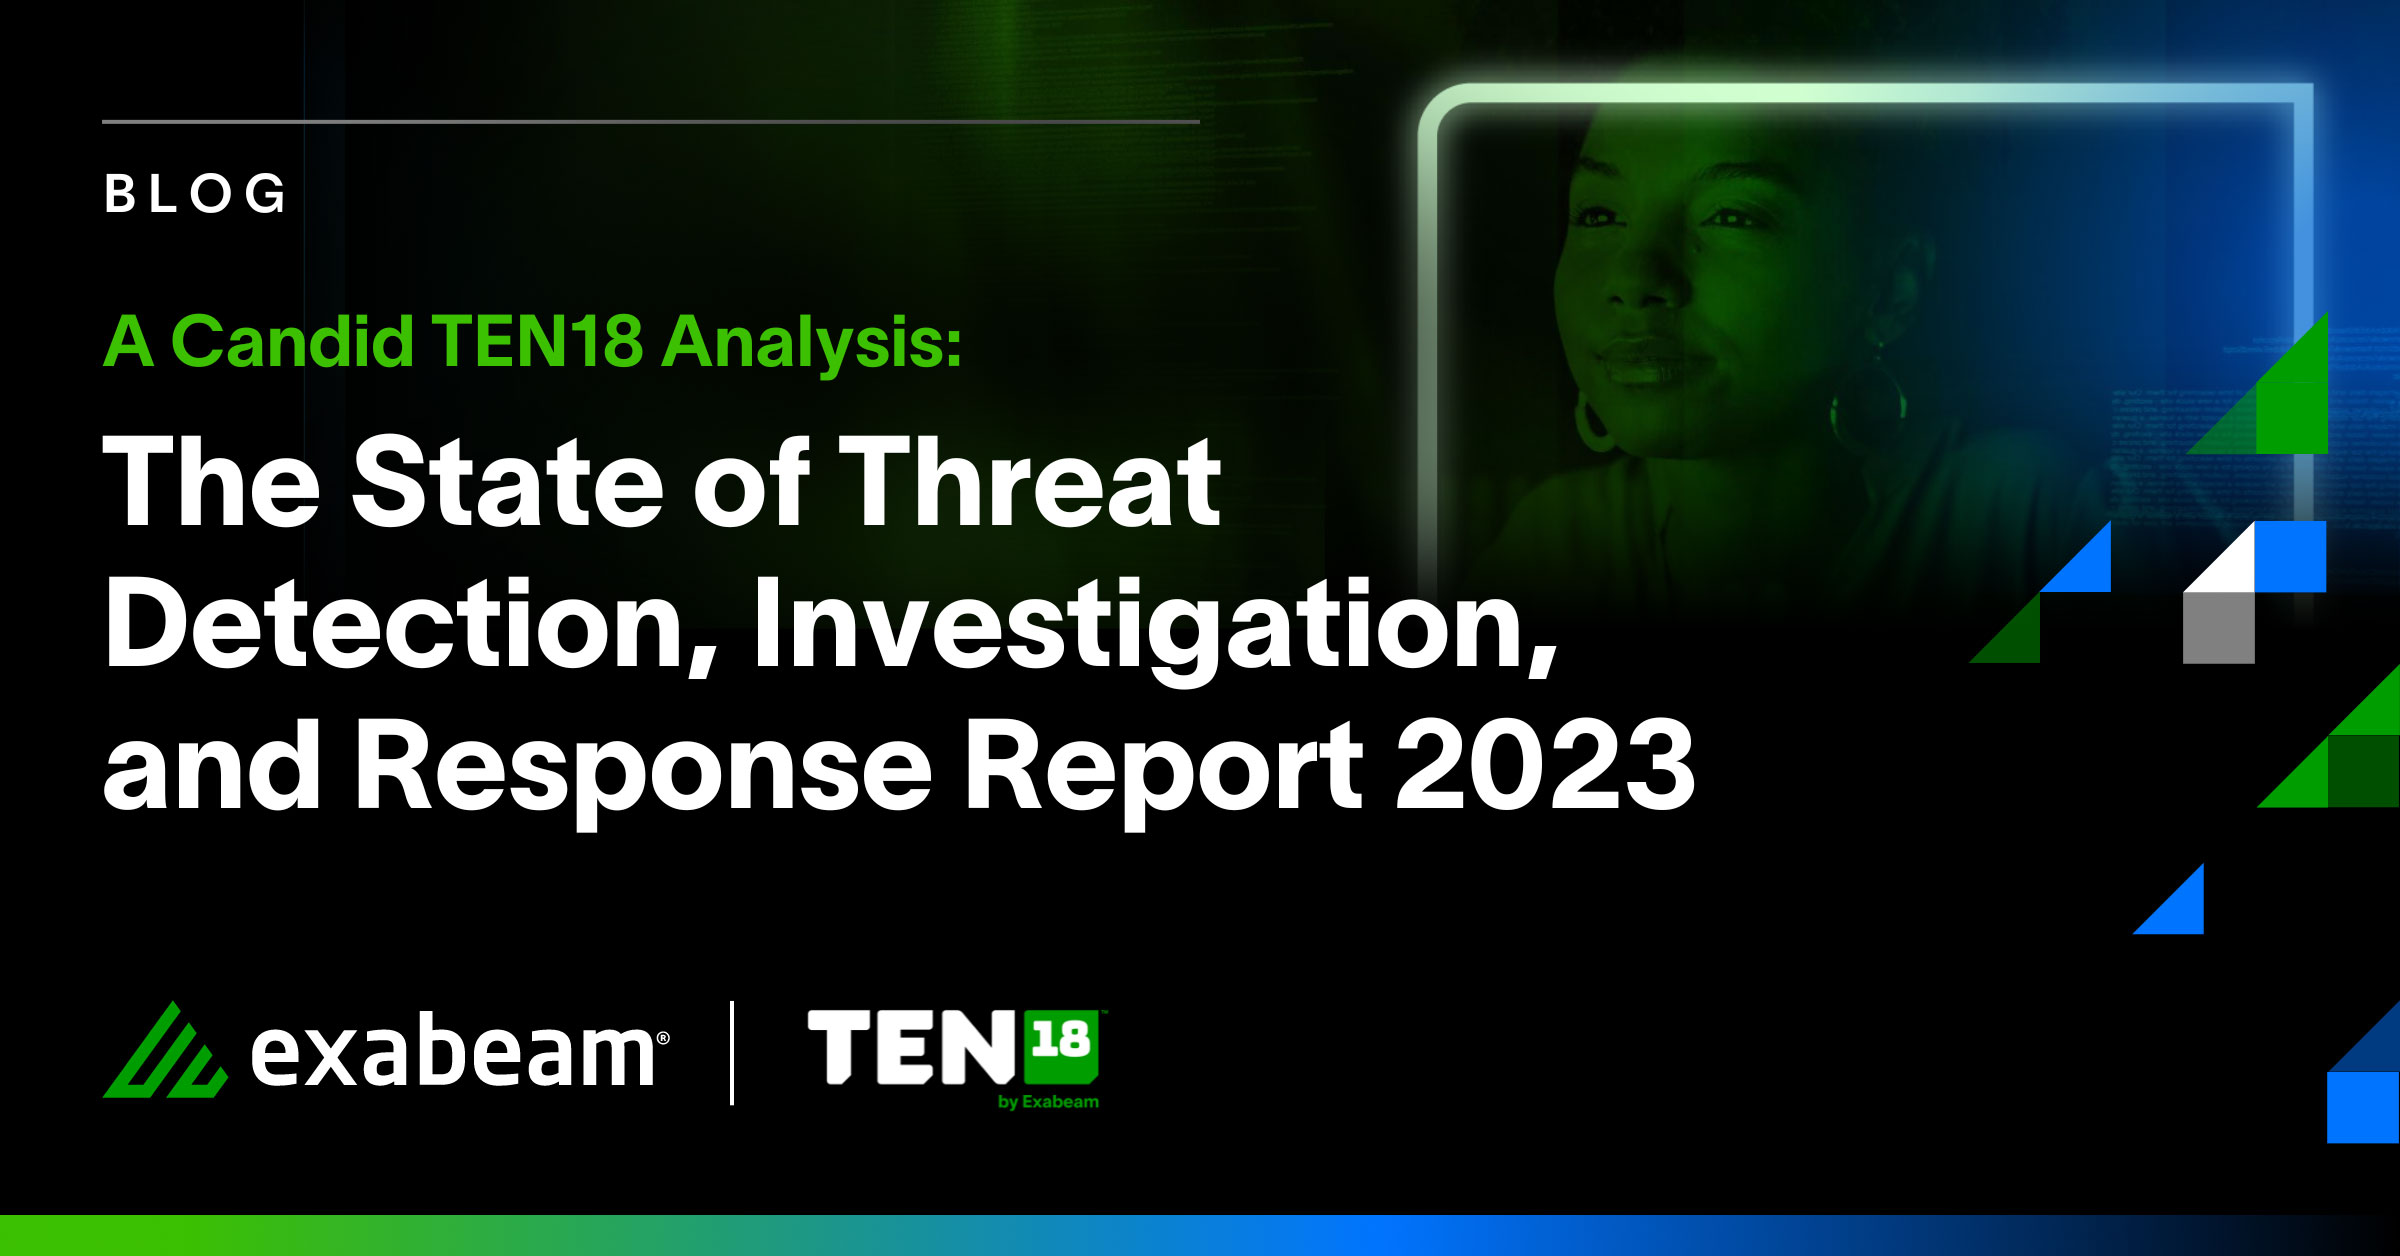 A (Candid) TEN18 Analysis: The State of Threat Detection, Investigation, and Response Report 2023